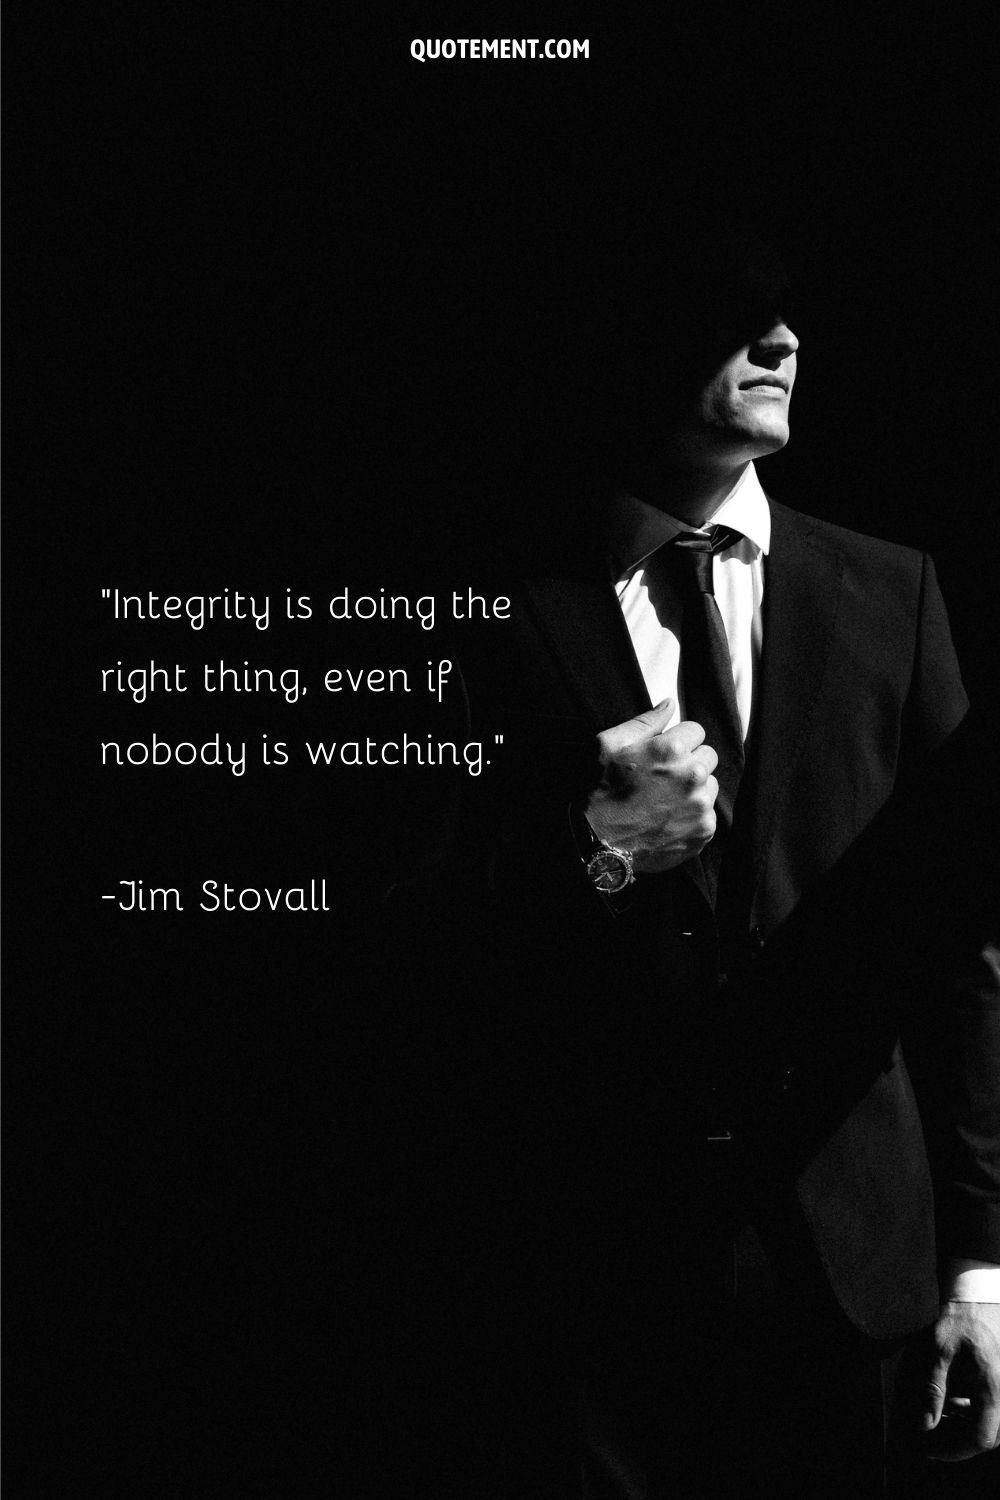 Integrity is doing the right thing, even if nobody is watching